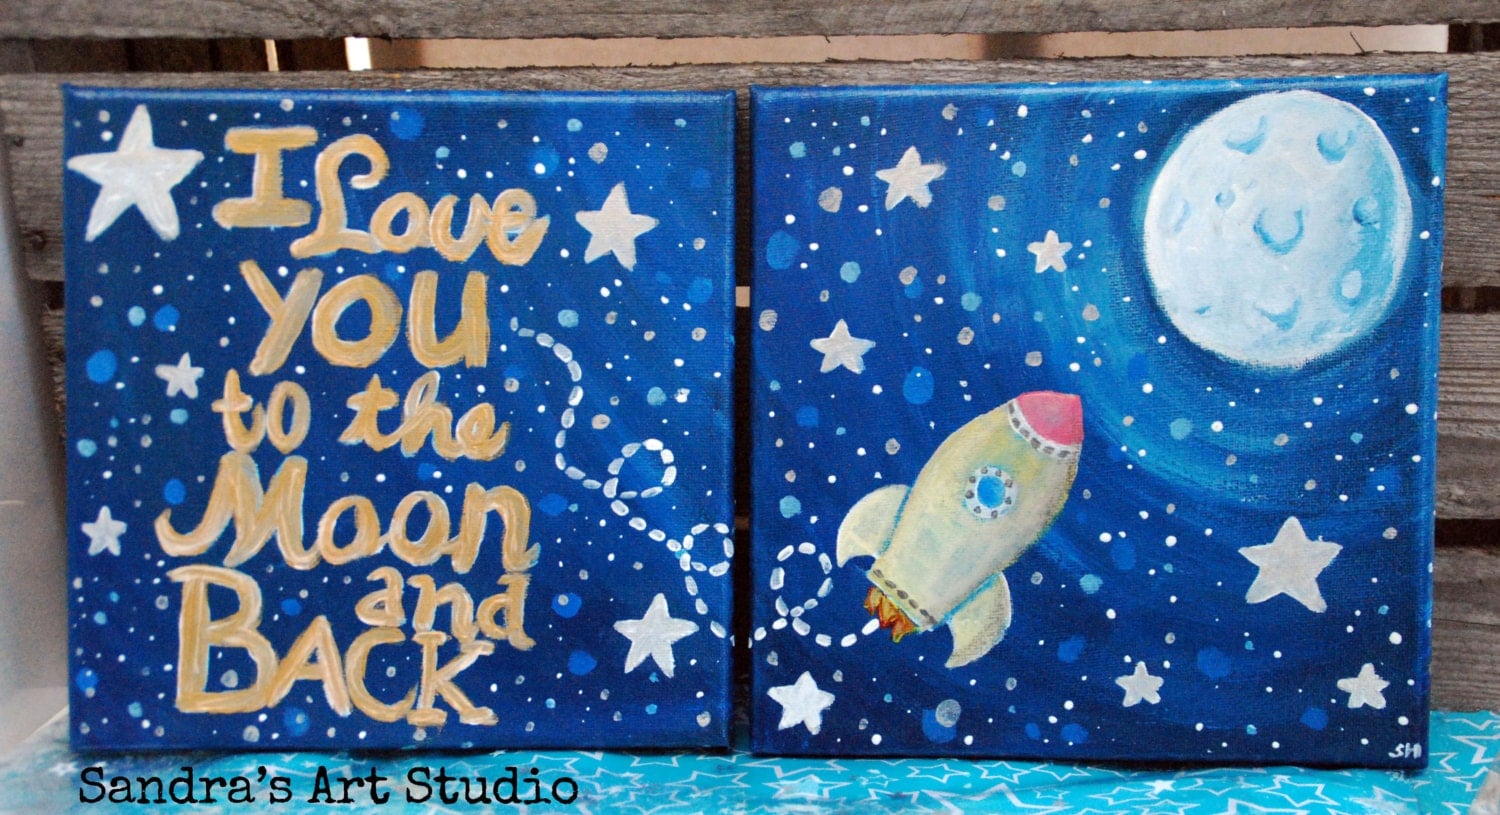 Diptych Of Two Little Paintings I Love You To The Moon And Back With A Rocket And The Moon And Stars Painting Size 7 7 8 X 7 7 8 Inch Sandra S Graphic Design